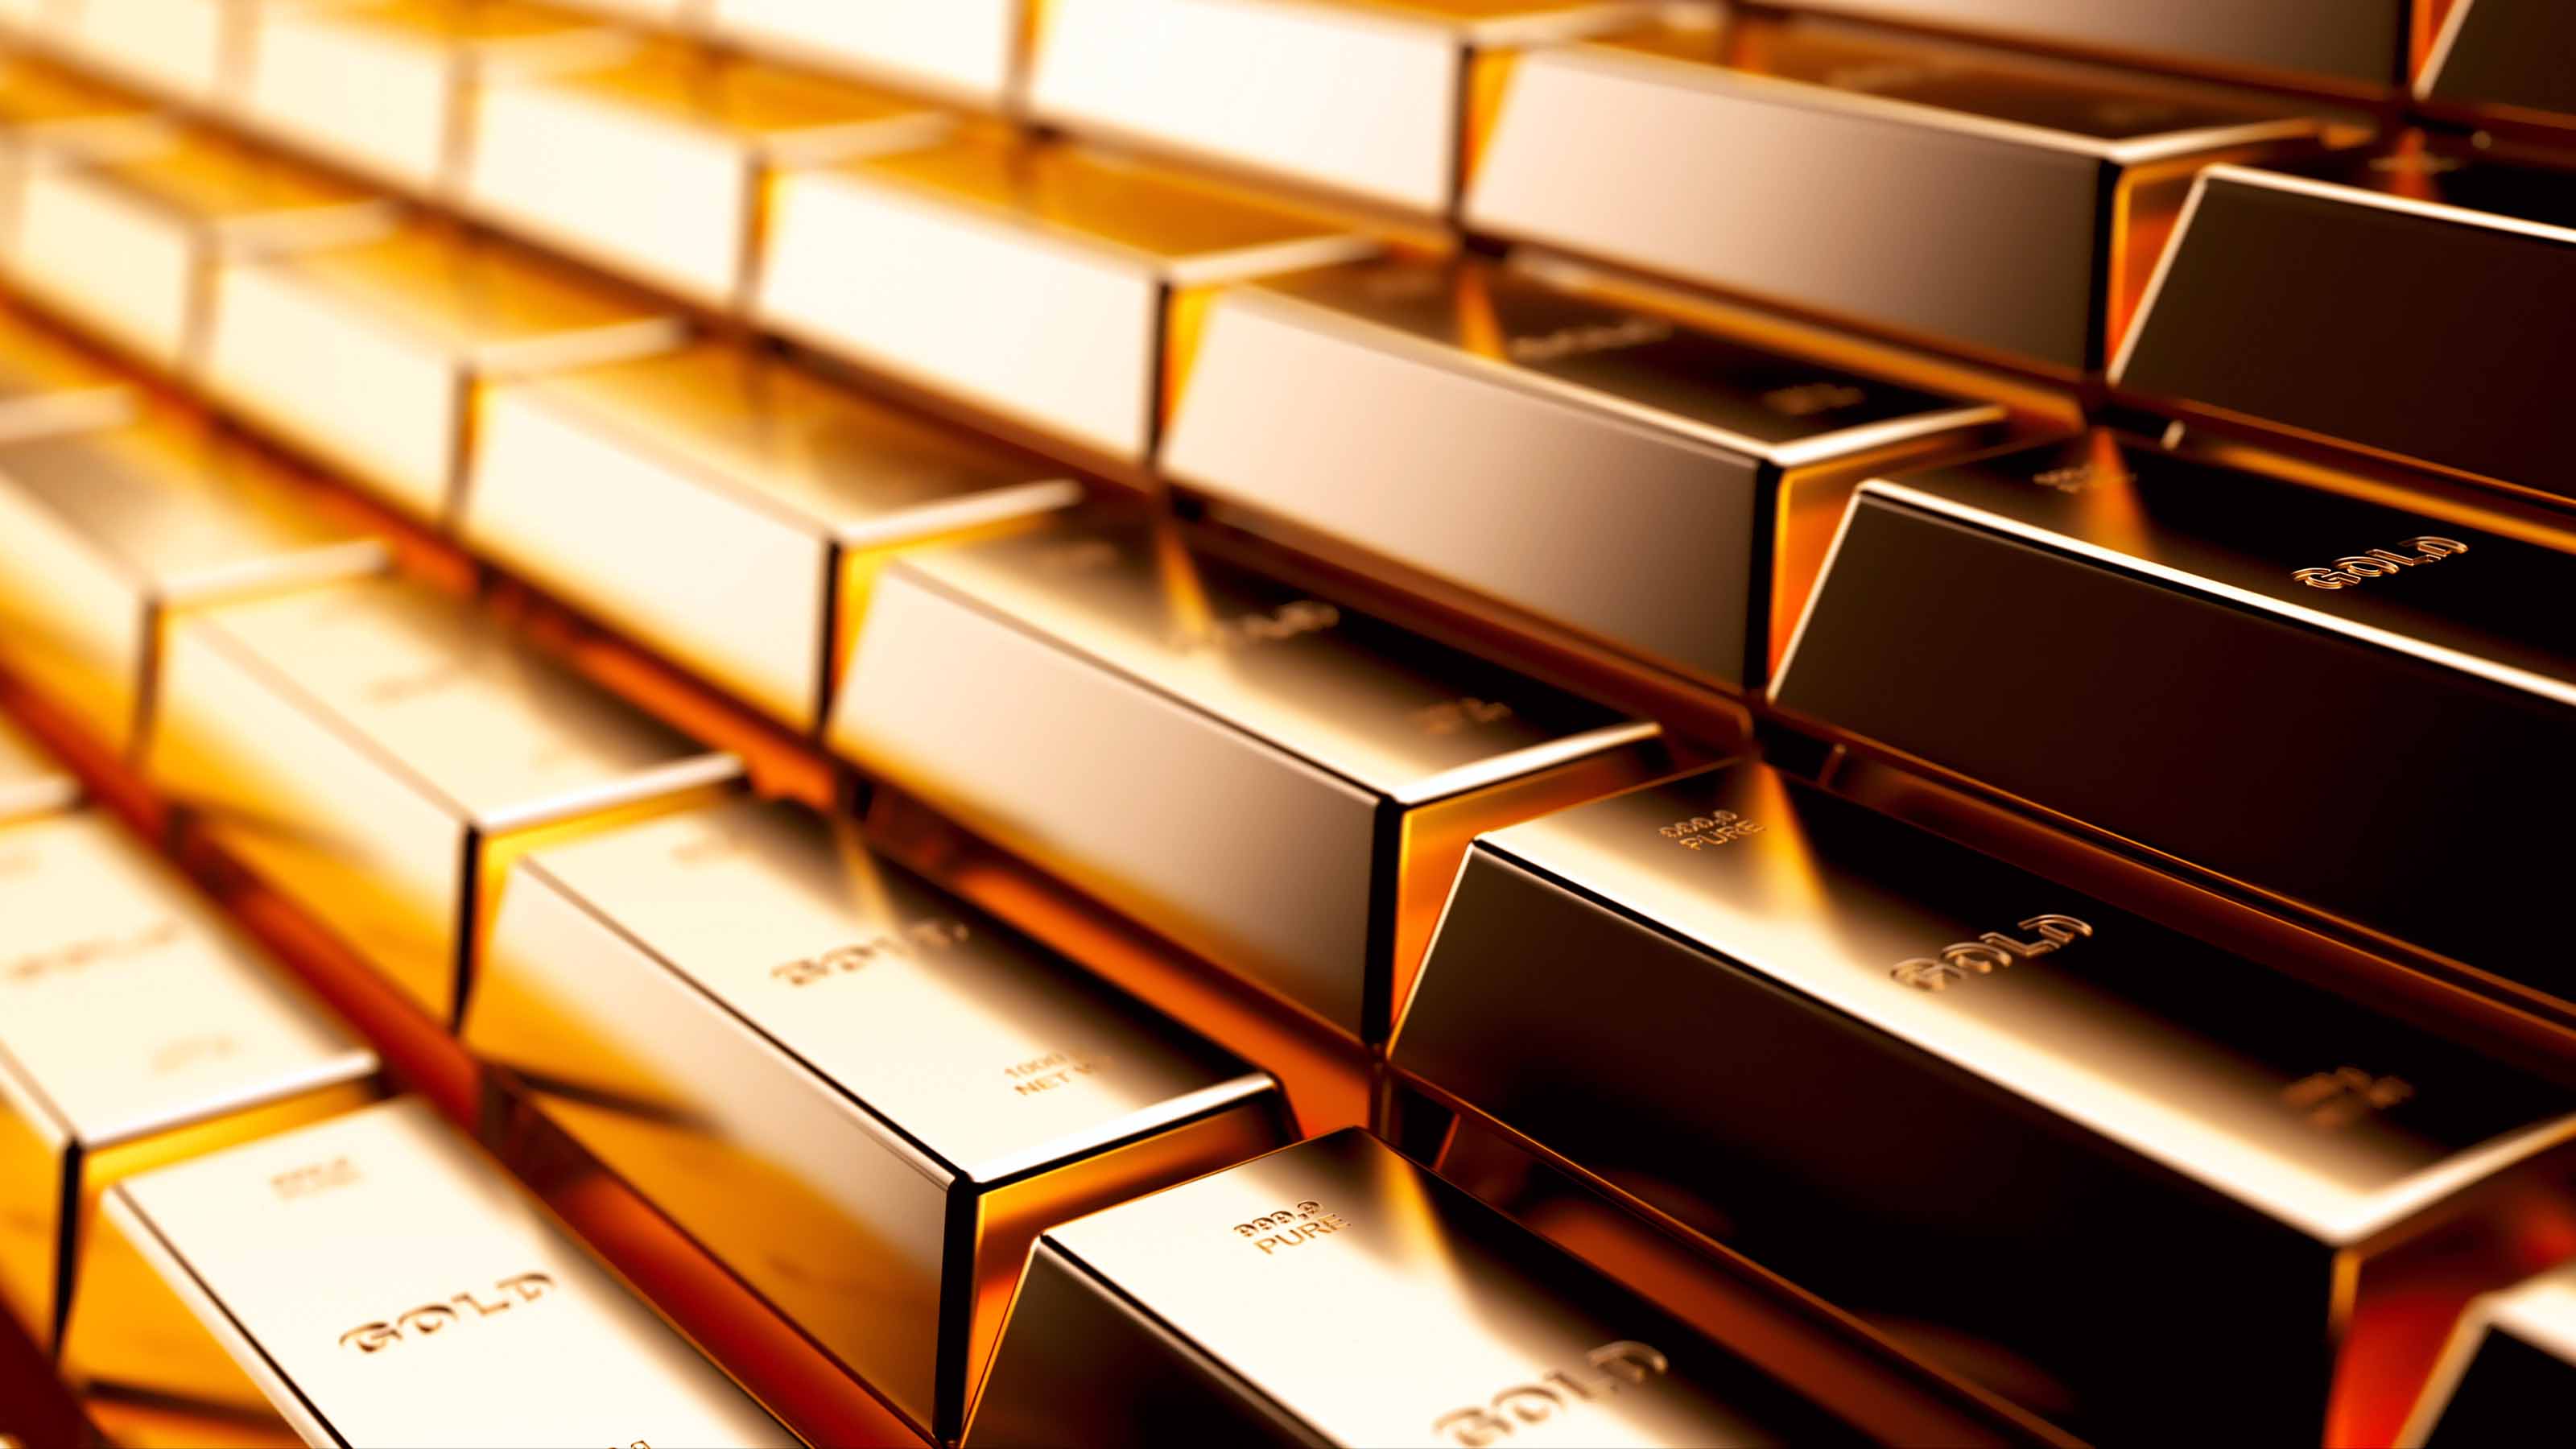 The best times to buy gold bars and coins - CBS News